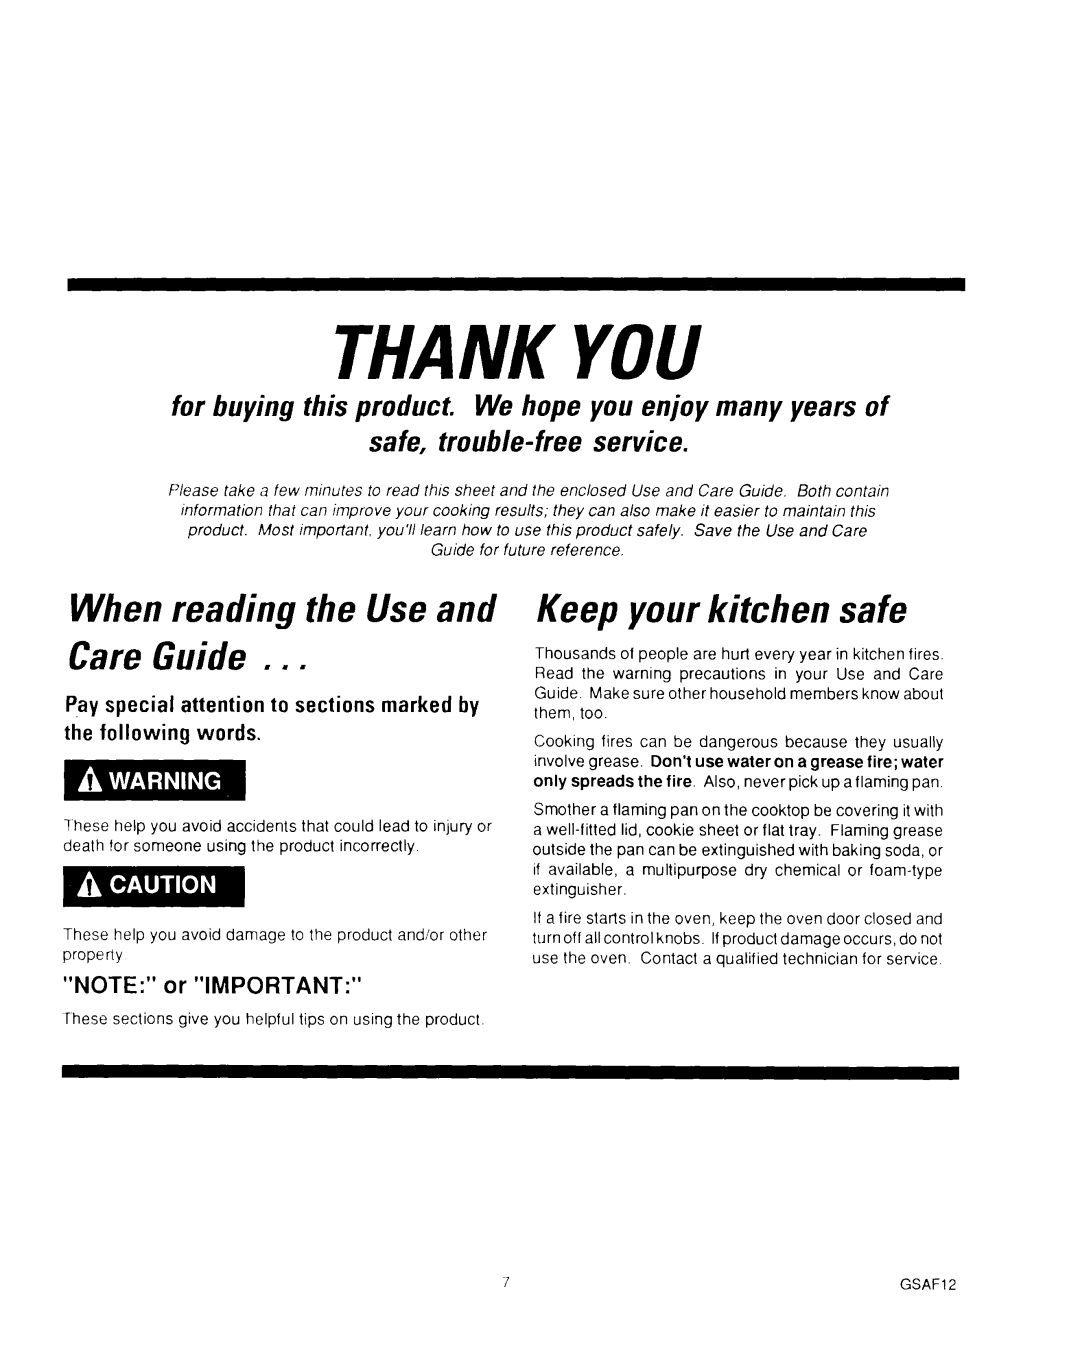 Roper 288 When reading the Use and Care Guide, Keep your kitchen safe, safe, trouble-freeservice, “NOTE ” or “IMPORTANT ” 